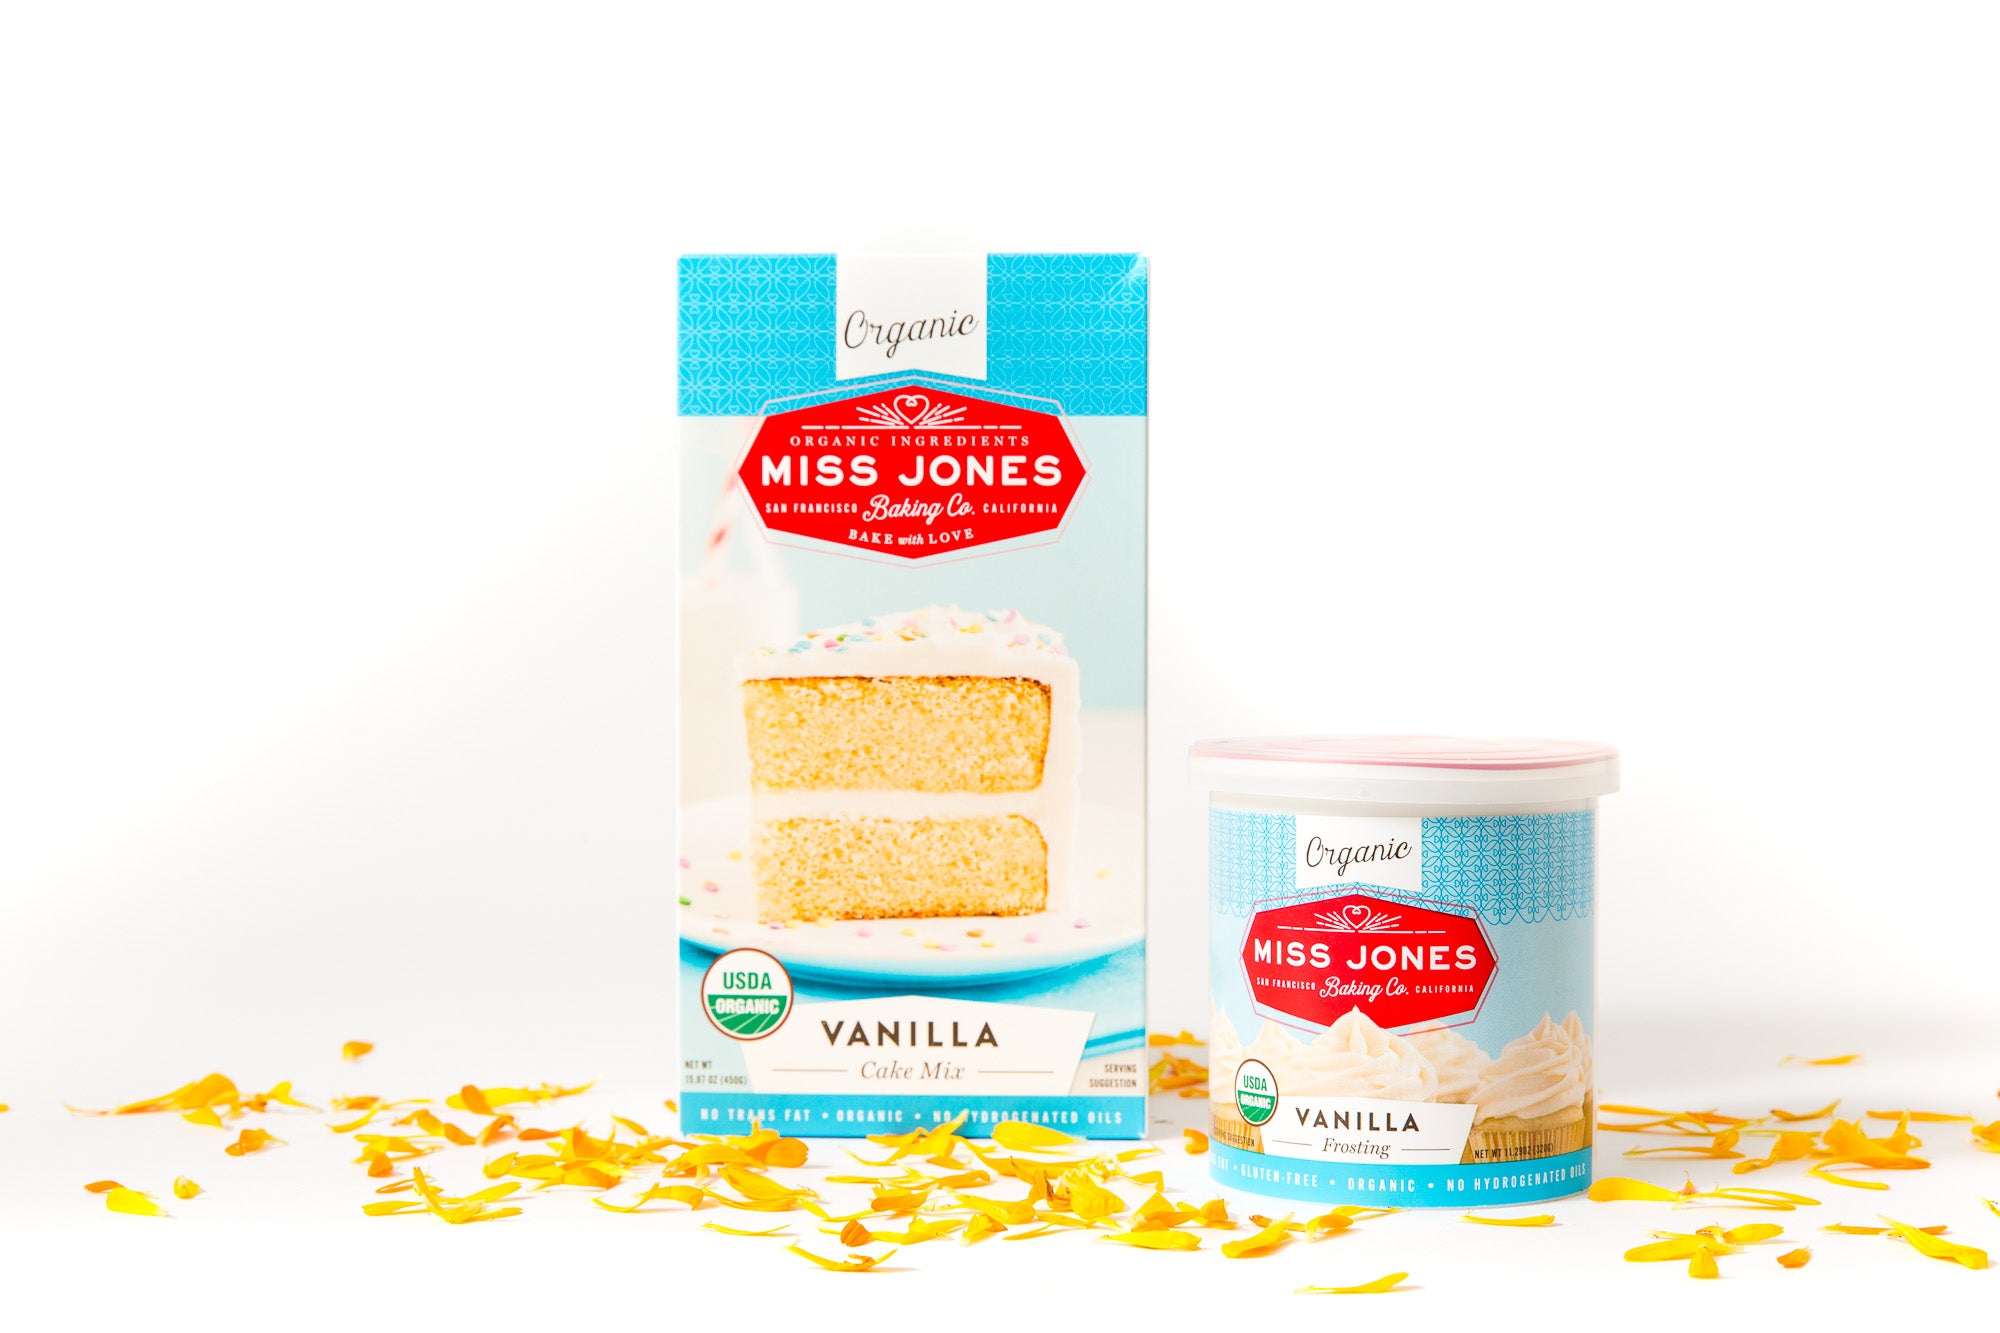 Image of a box of Miss Jones Vanilla Cake Mix and a jar of Miss Jones Vanilla Frosting surrounded by yellow flower petals for Miss Jones Baking Co Floral Bloom Layer Cake